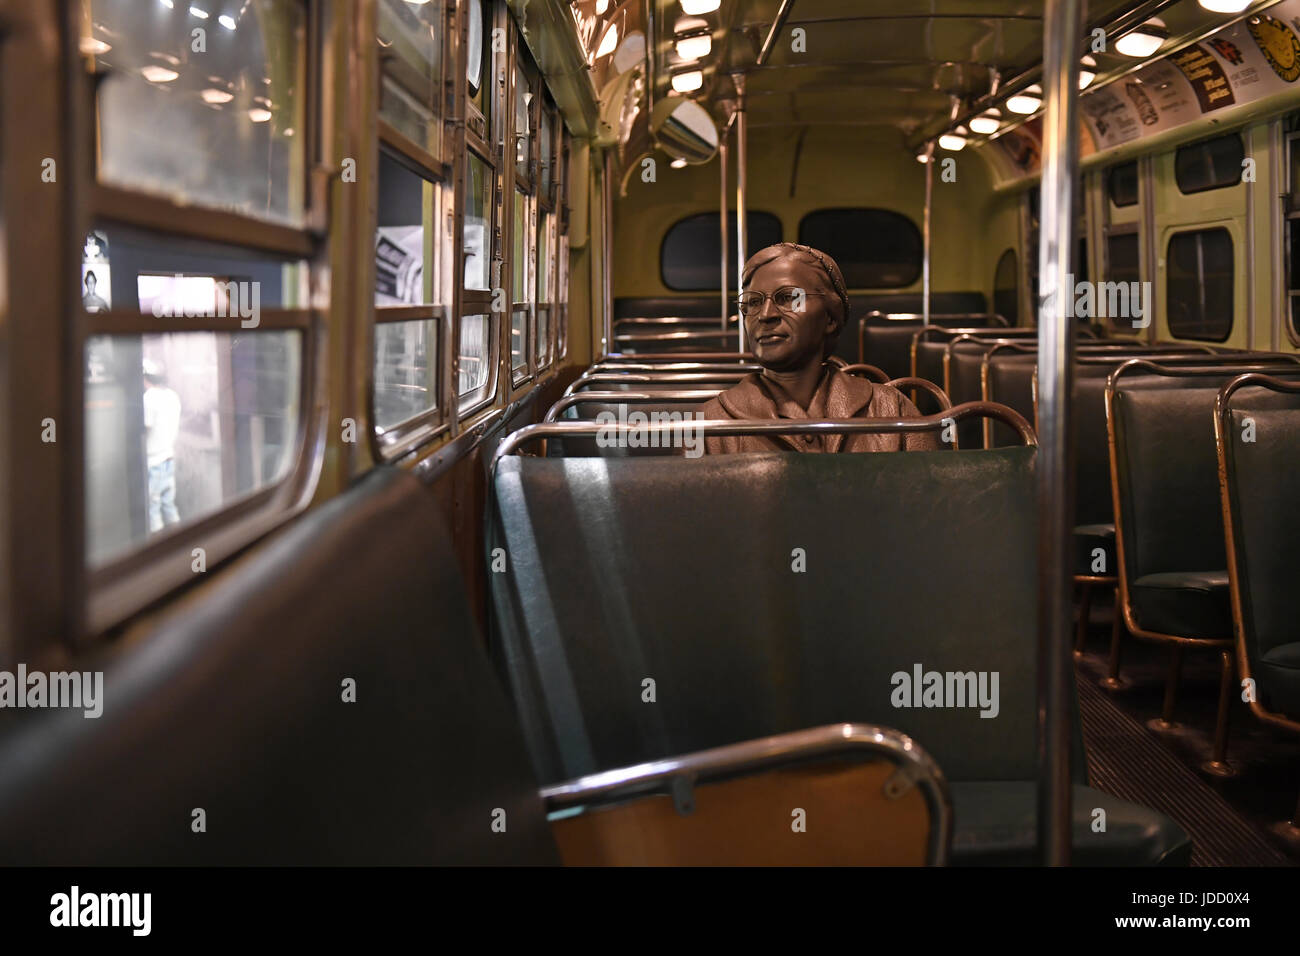 Memphis, TN, USA - June 9, 2017: Sculpture of Rosa Parks inside bus at the National Civil Rights Museum and the site of the Assassination of Dr. Marti Stock Photo